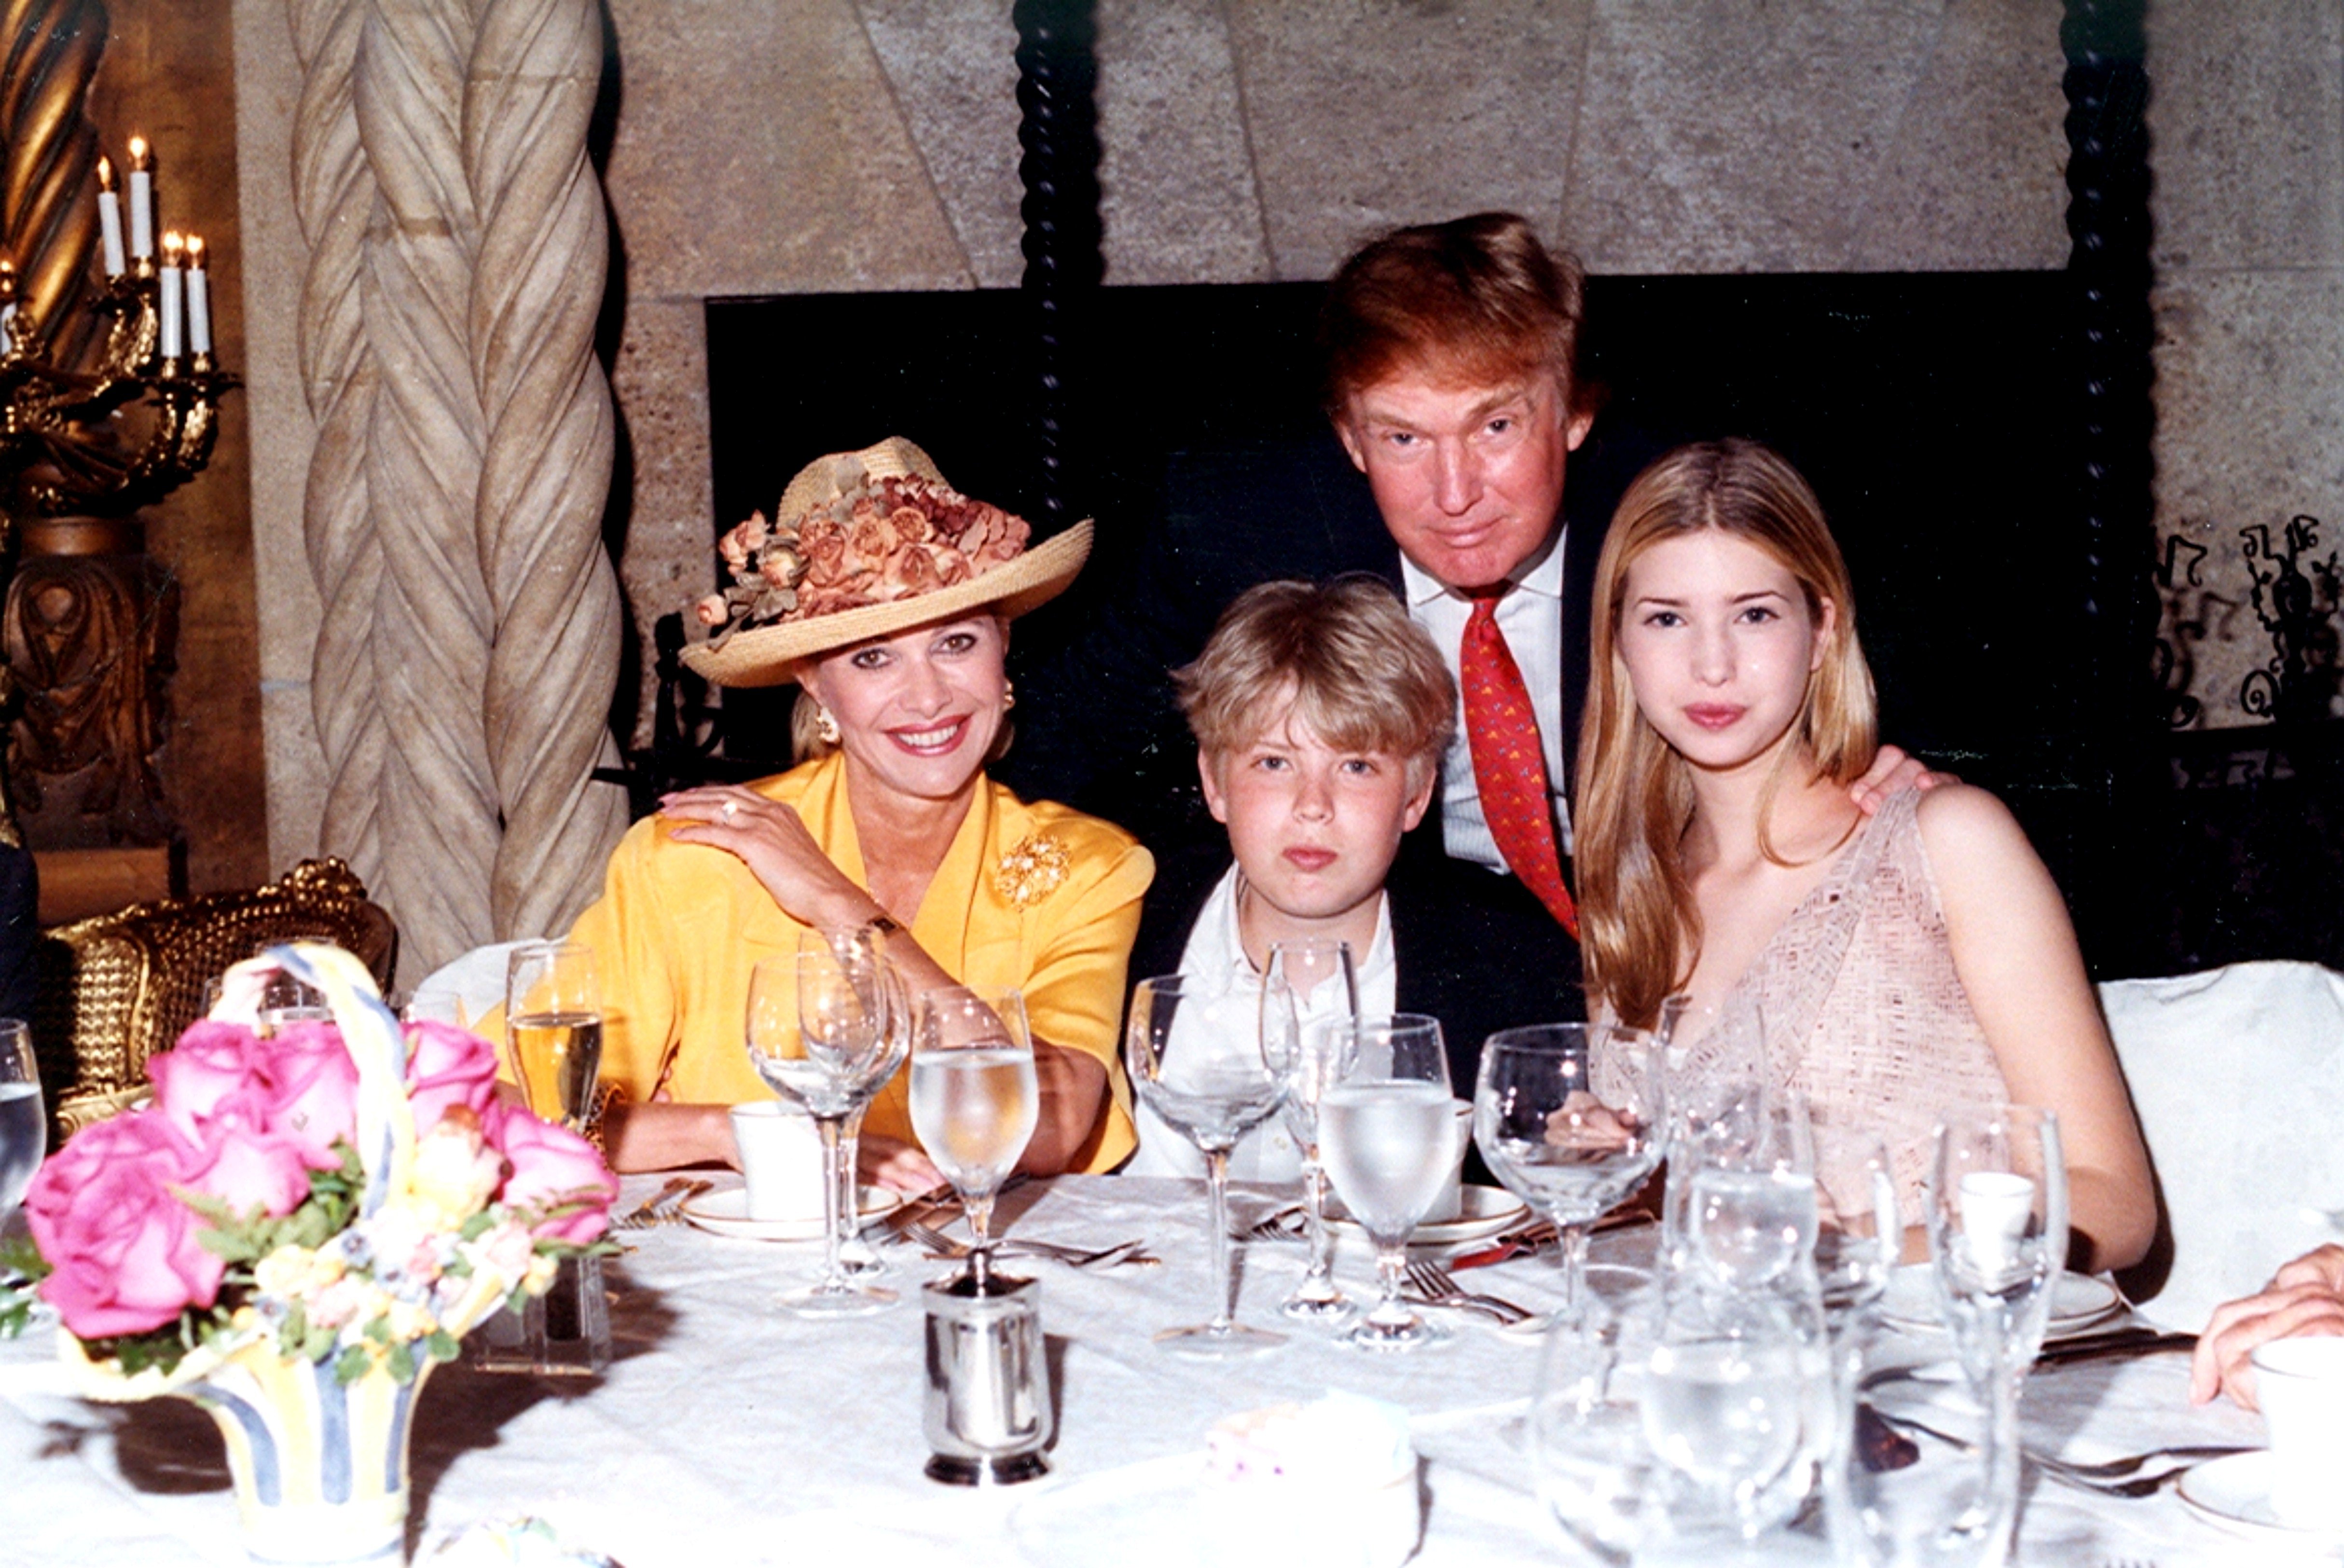 Family portrait of socialite Ivana Trump, her son Eric Trump, her former husband businessman Donald Trump, and her daughter Ivanka Trump as they sit at a table at the Mar-a-Lago estate, Palm Beach, Florida, 1998.  | Source: Getty Images